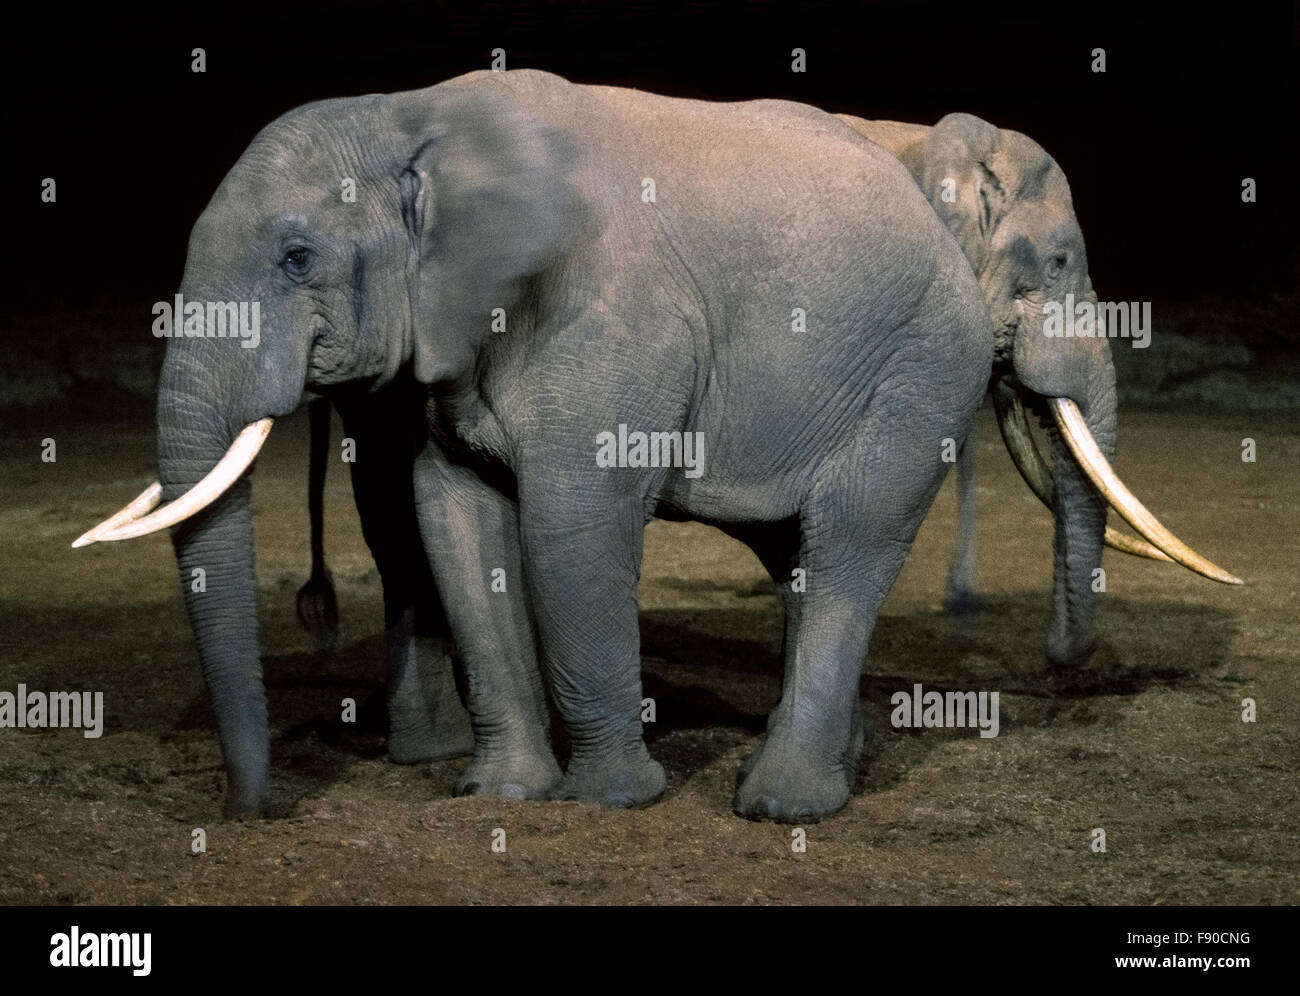 A 'two-headed' African elephant is captured at night in this eye-catching humorous photograph taken from The Ark, a popular safari lodge with viewing decks overlooking a watering hole that attracts all types of wild game in Aberdare National Park in Kenya, East Africa. Poaching for the animals' valuable ivory tusks is estimated to result in the slaughter of 100 elephants a day across Africa, where some conservationists believe the total population has been decimated to as few as 250,000 elephants. Stock Photo